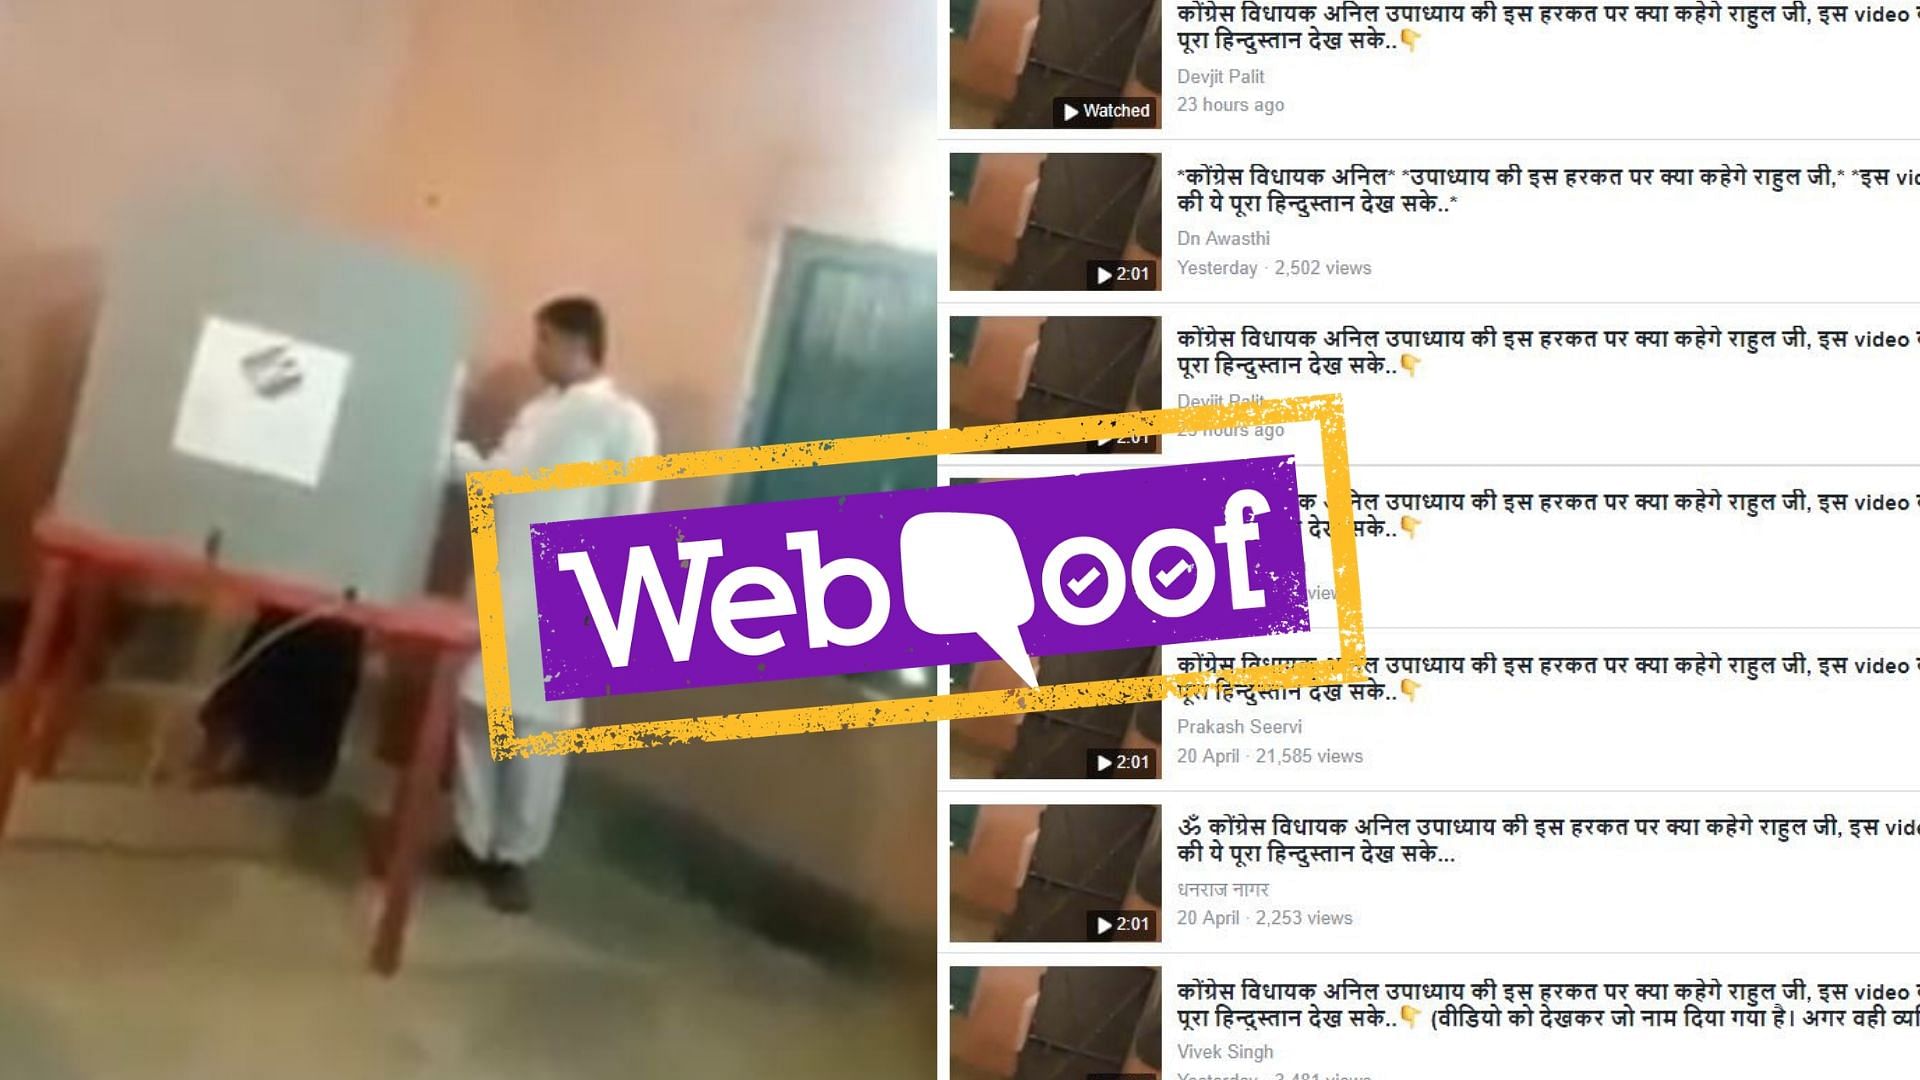 A video suggestive of a polling booth being captured with distorted audio went viral on social media, accusing Congress MLA Anil Upadhyay of seizing the booth.